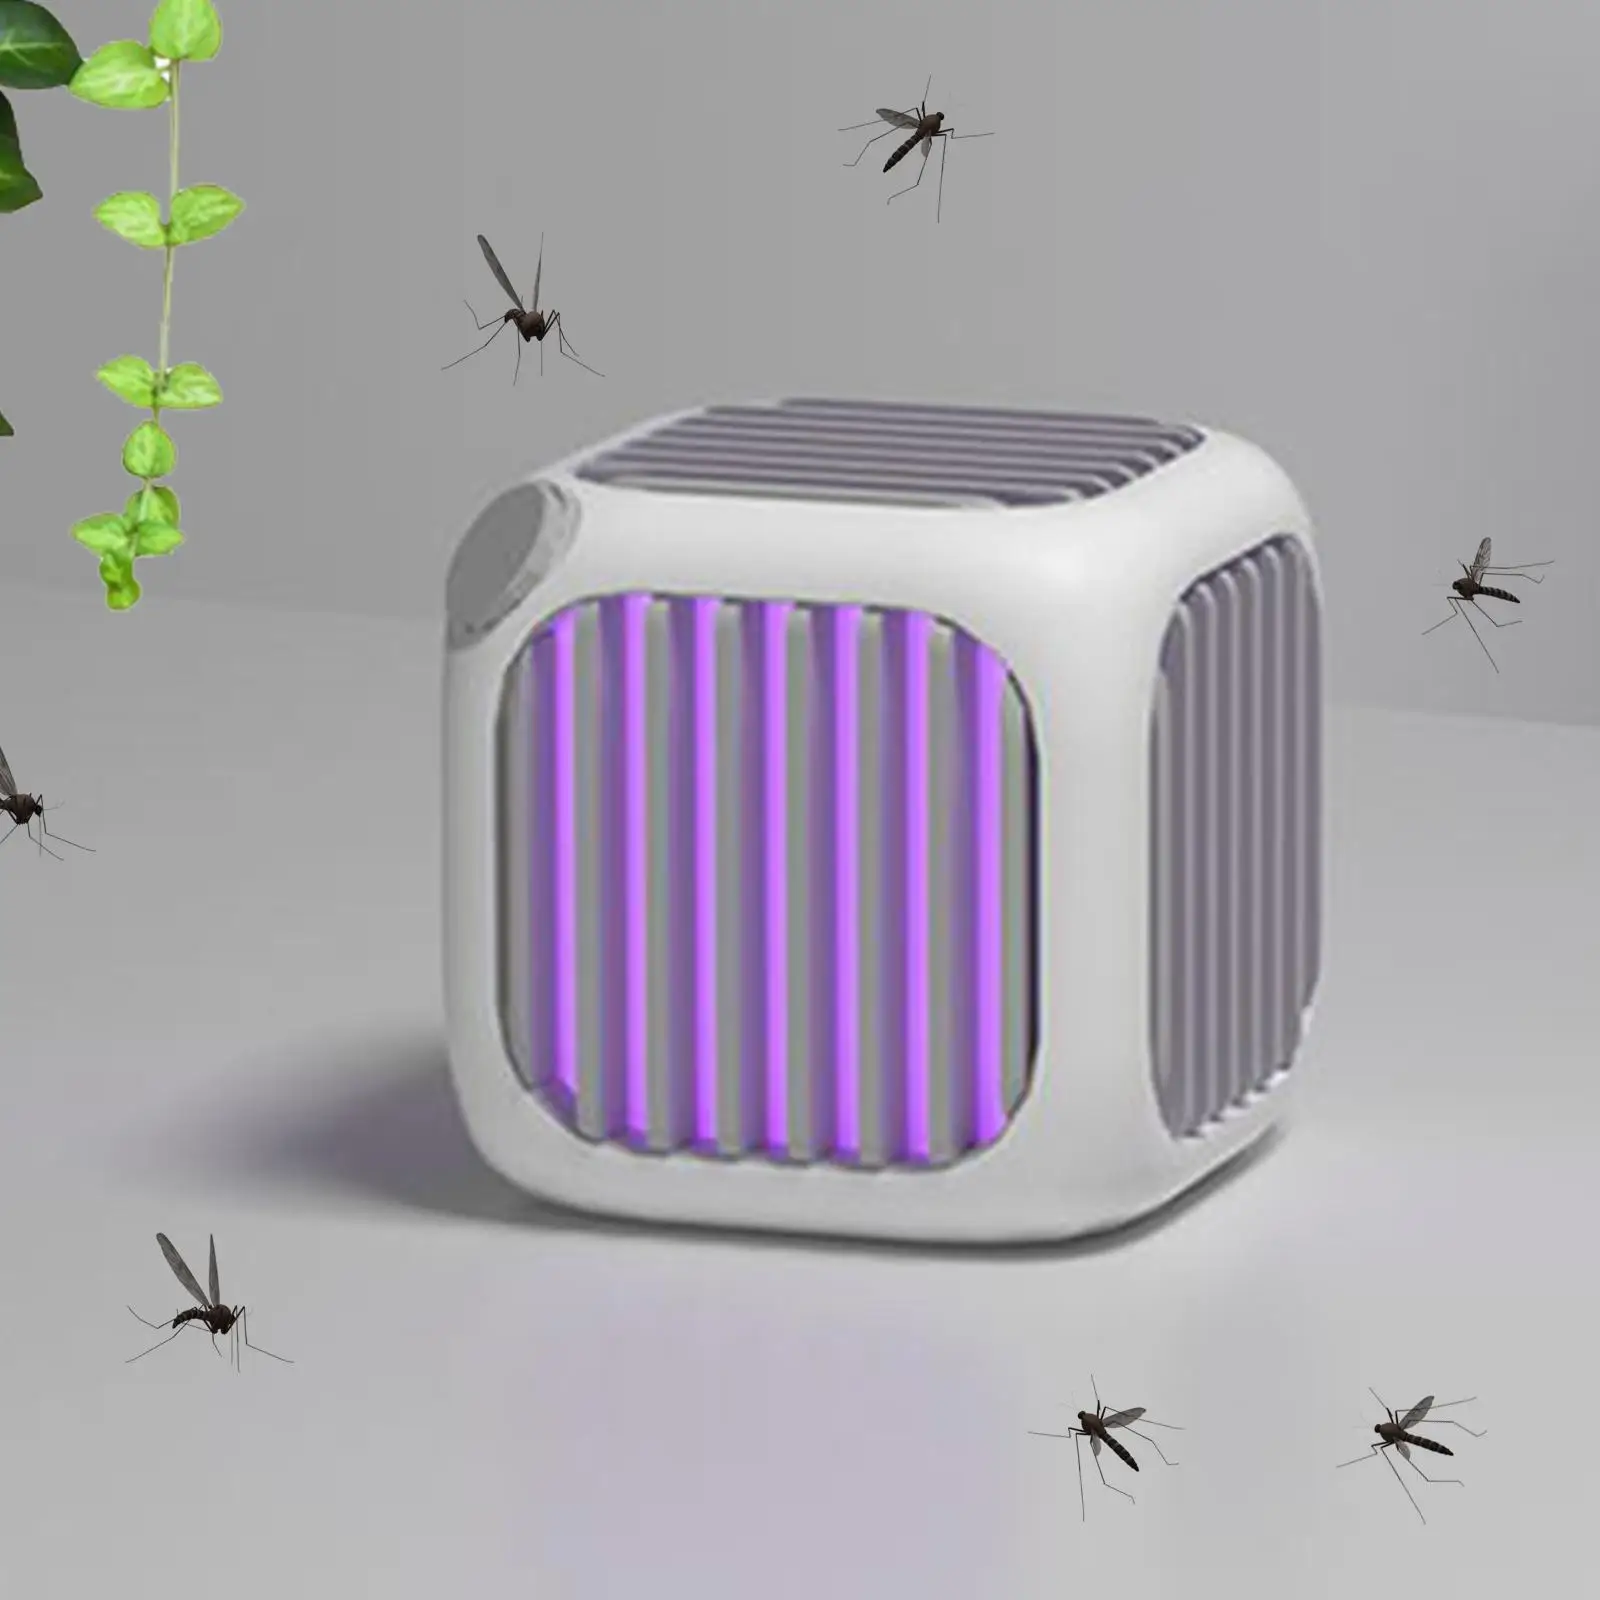 Fly Catcher Lamp Small USB Rechargeable Quiet Fly Electric Fly Catcher Lamp for Camping Home Garden Office Outdoor